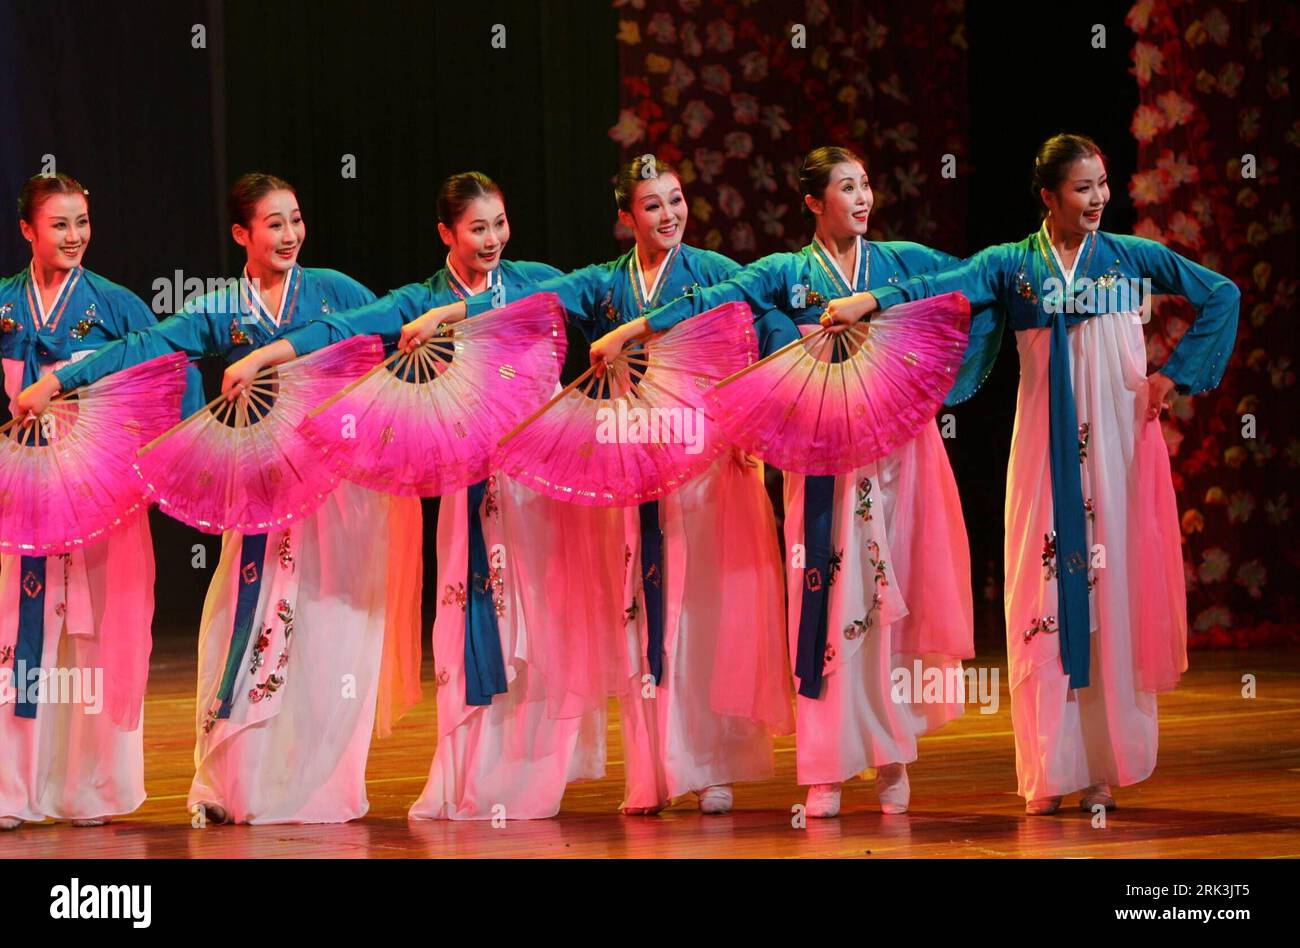 Bildnummer: 53523278  Datum: 10.10.2009  Copyright: imago/Xinhua (091011) -- WENZHOU, Oct. 11, 2009 (Xinhua) -- Dancers of the Pyongyang Art Troupe of the Democratic  s Republic of Korea (DPRK) perform at the Dongnan Theater in Wenzhou, east China s Zhejiang Province, Oct. 10, 2009. More than 20 wonderful programs, including the long drum dance and fan dance, were shown to audiences of Wenzhou on Saturday. (Xinhua/Zheng Peng) (mcg) (5)CHINA-ZHEJIANG-WENZHOU-PERFORMANCE (CN) PUBLICATIONxNOTxINxCHN Musik Aktion Nordkorea kbdig xsk 2009 quer o0 Tanz    Bildnummer 53523278 Date 10 10 2009 Copyrigh Stock Photo